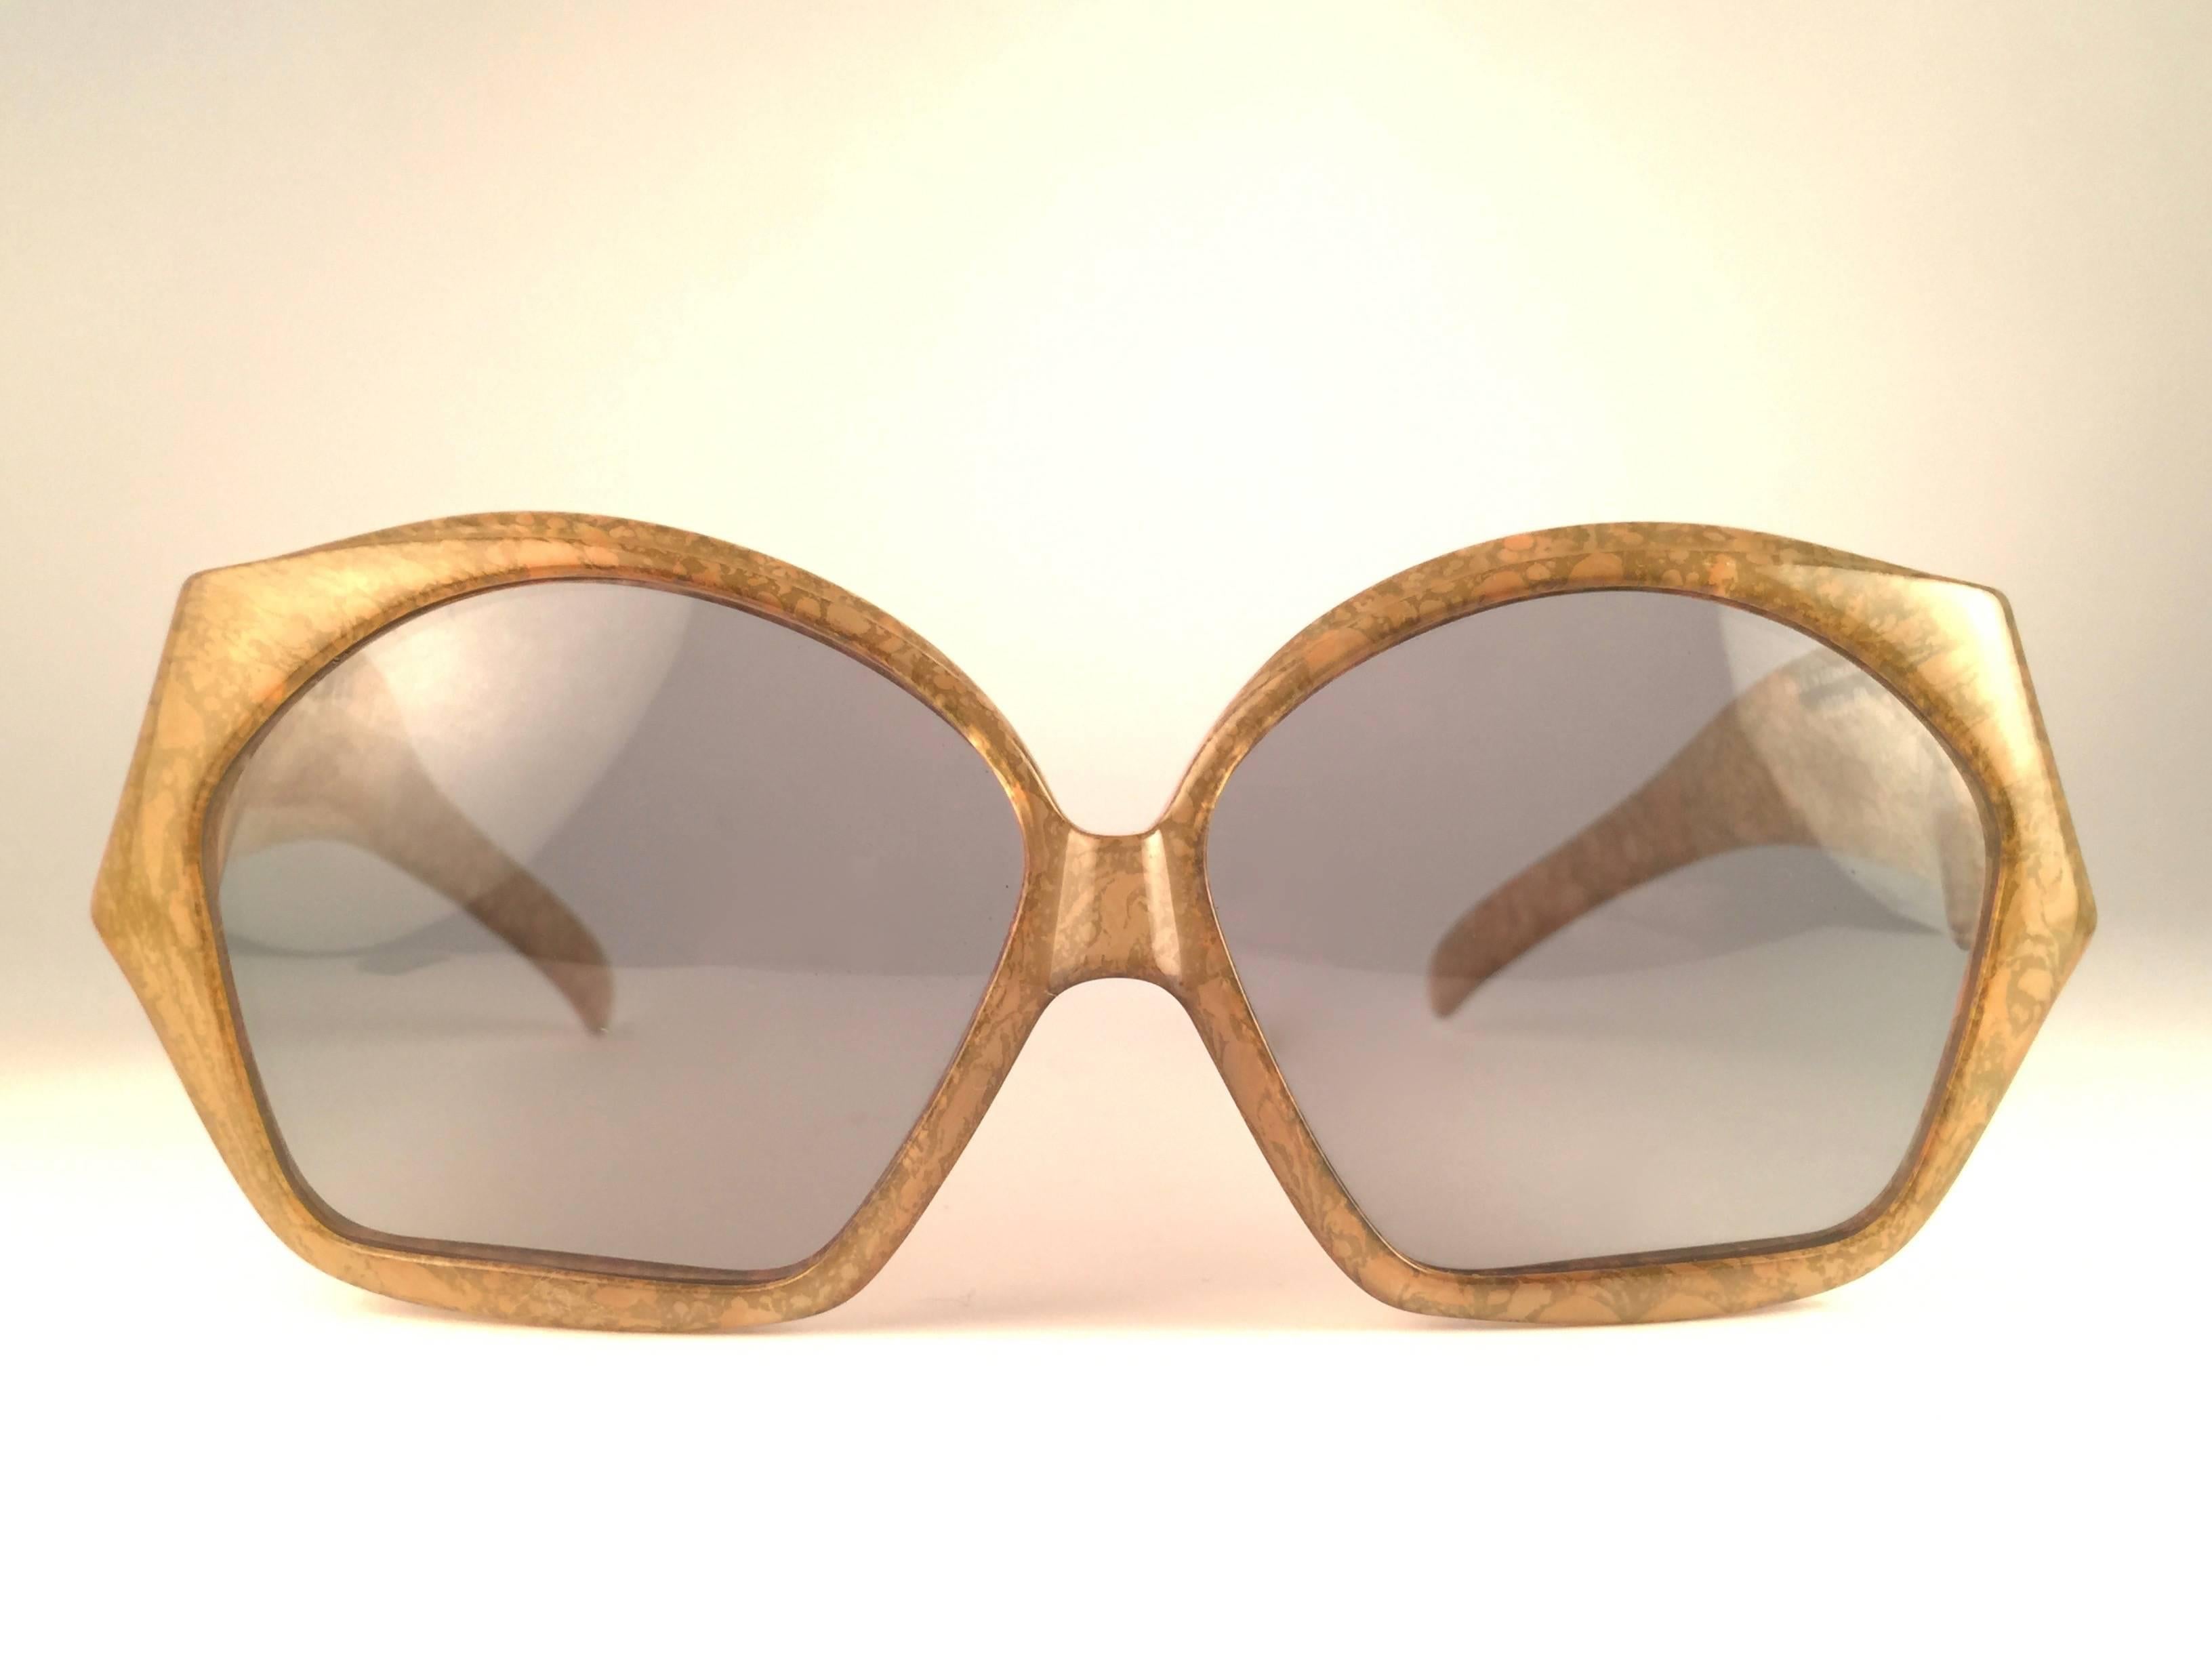 New Vintage Christian Dior 2028 60 Jasped marbled green frame with spotless light grey lenses. 

Made in Germany.
 
Produced and design in 1970's.

New, never worn or displayed. Comes with its original silver Christian Dior Lunettes sleeve.
